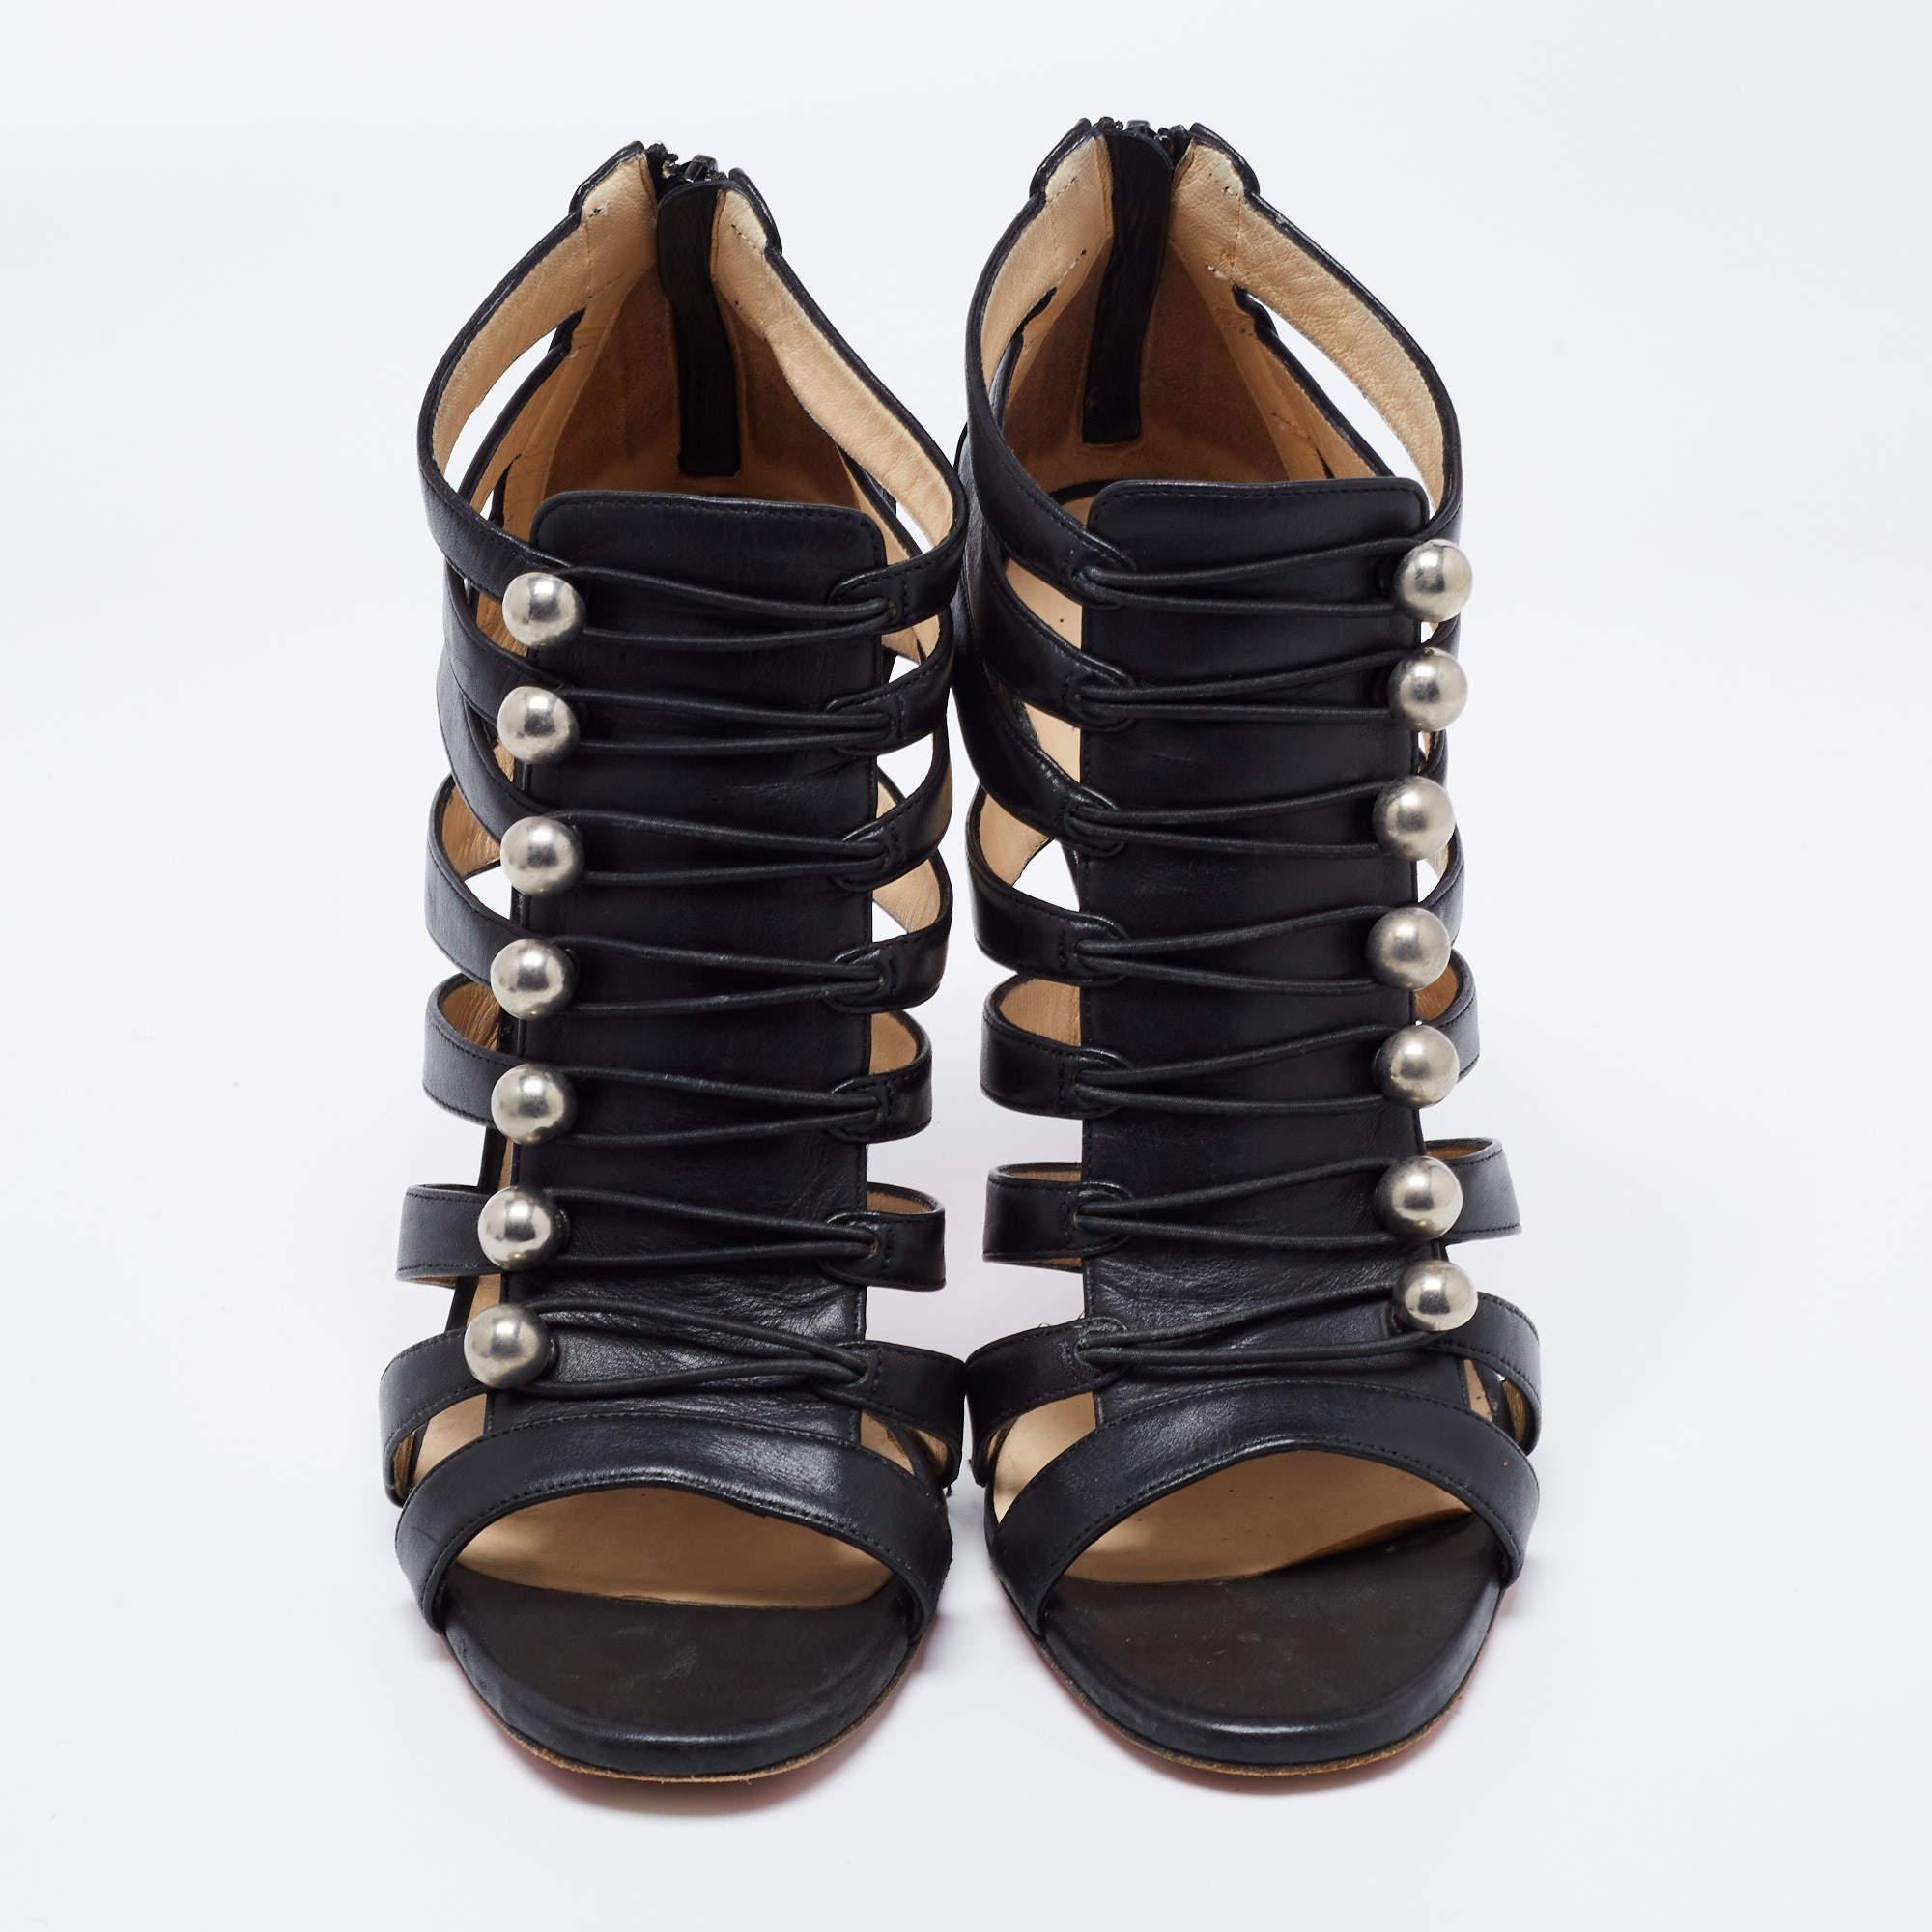 Create an unforgettable statement edit for a party even with the simplest of outfits with these Christian Louboutin caged sandals. The stylish and eye-catching black leather and silver-tone studs are stationed together on this stunning pair which is